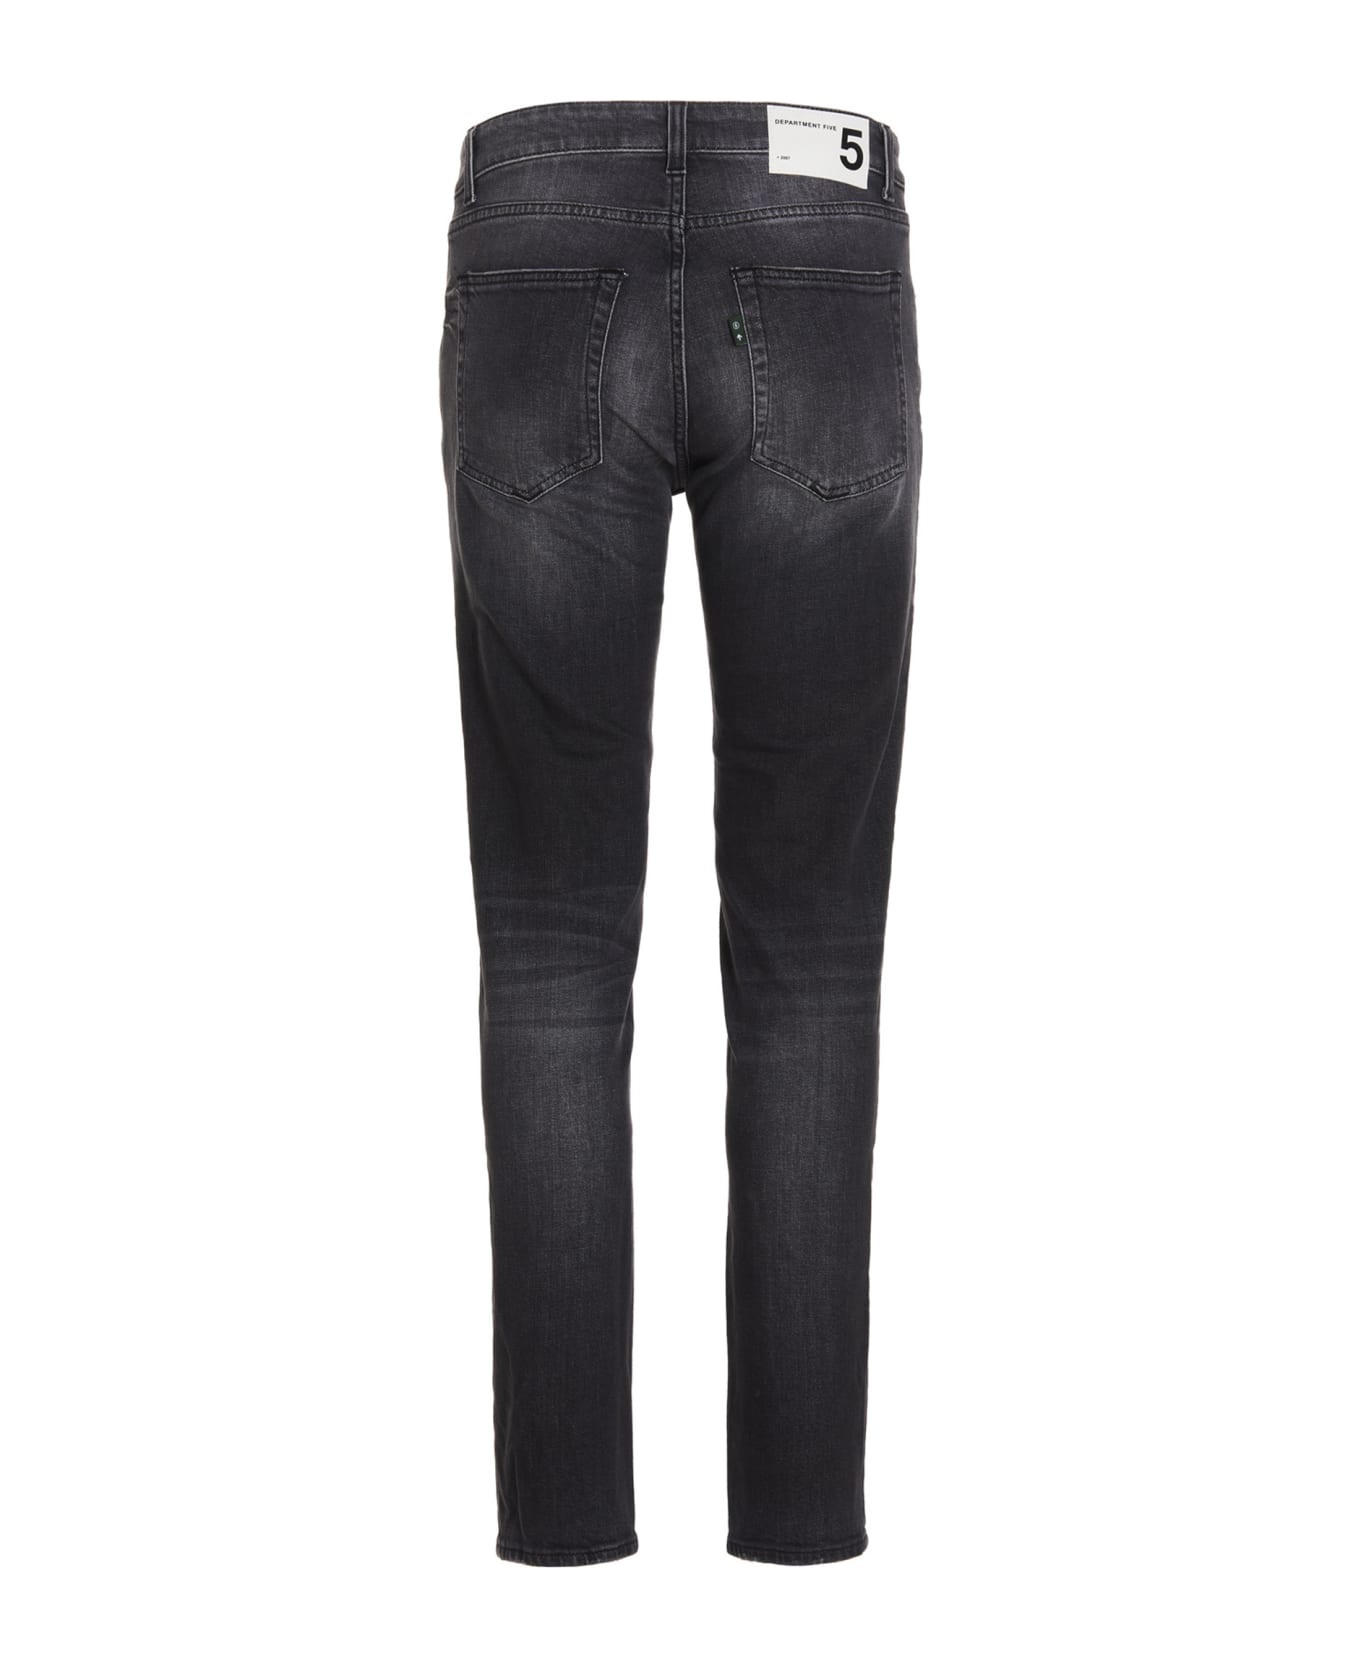 Department Five 'skeith' Jeans - Gray